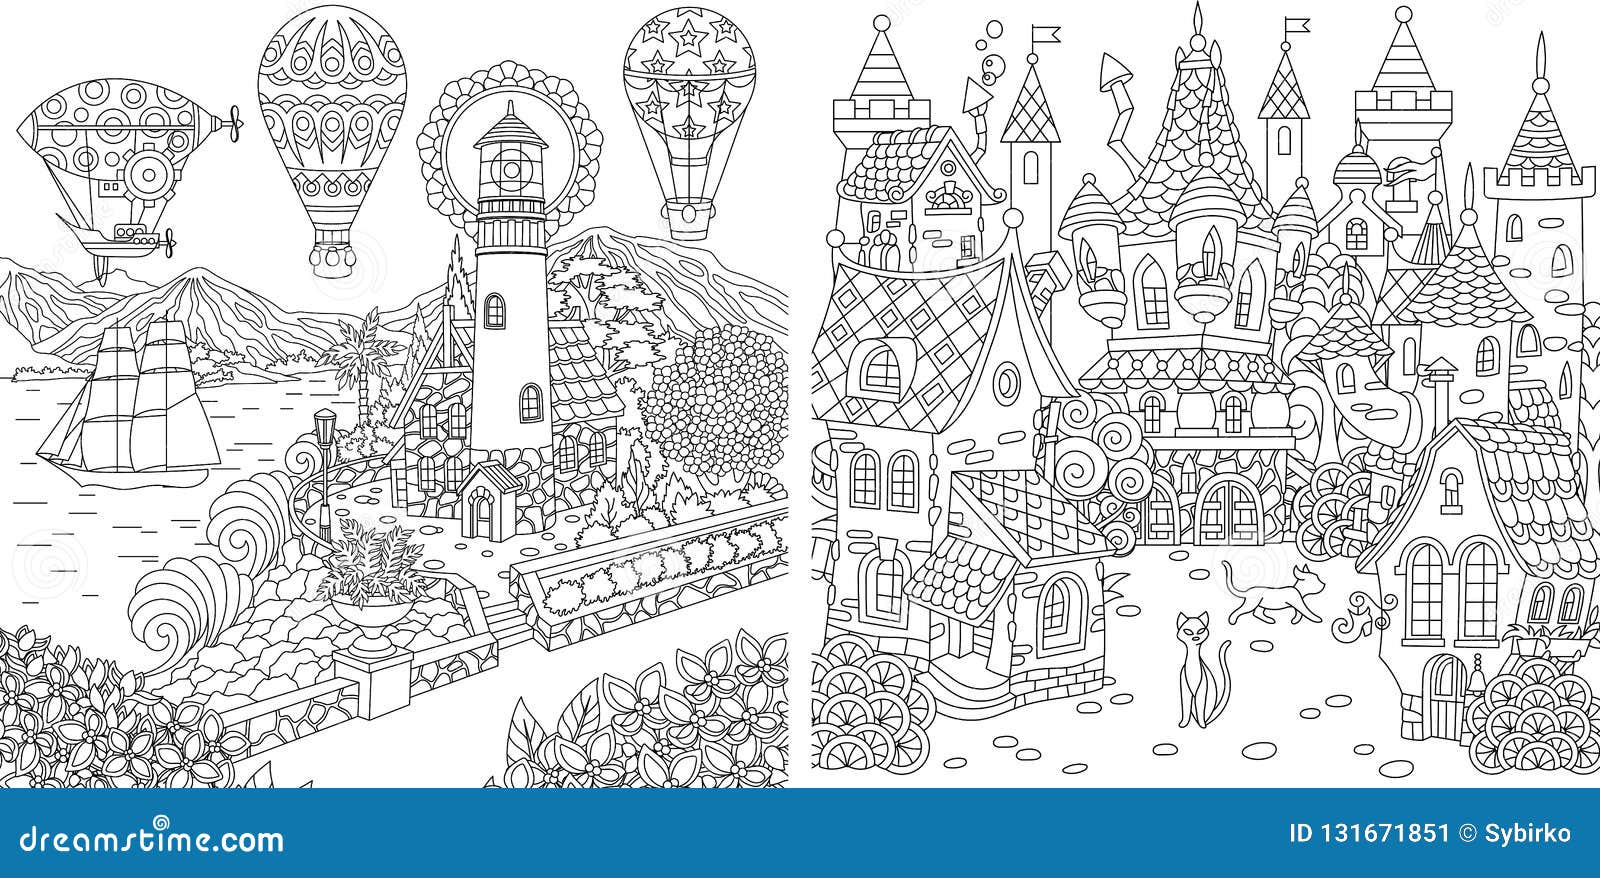 coloring pages. coloring book for adults. colouring pictures with light house and fairy tale castle. antistress freehand sketch